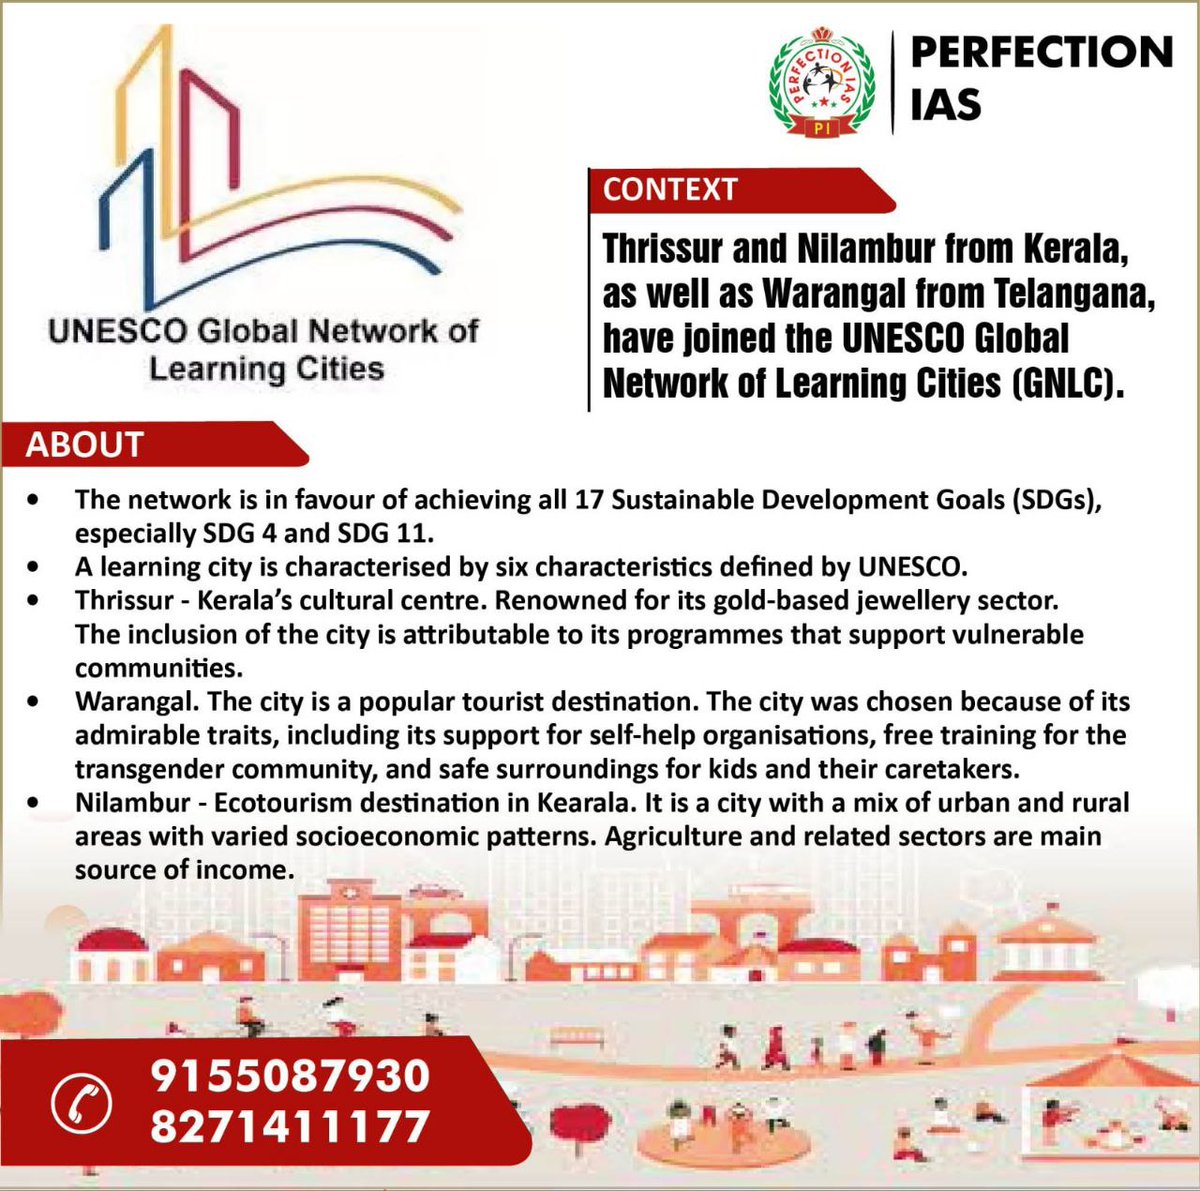 UNESCO Global Network of learning city
. 
. 
. 
#learningcity #unesco #global #network #kerela #telangana #sdg #gnlc #upsc #bpsc #civilservices